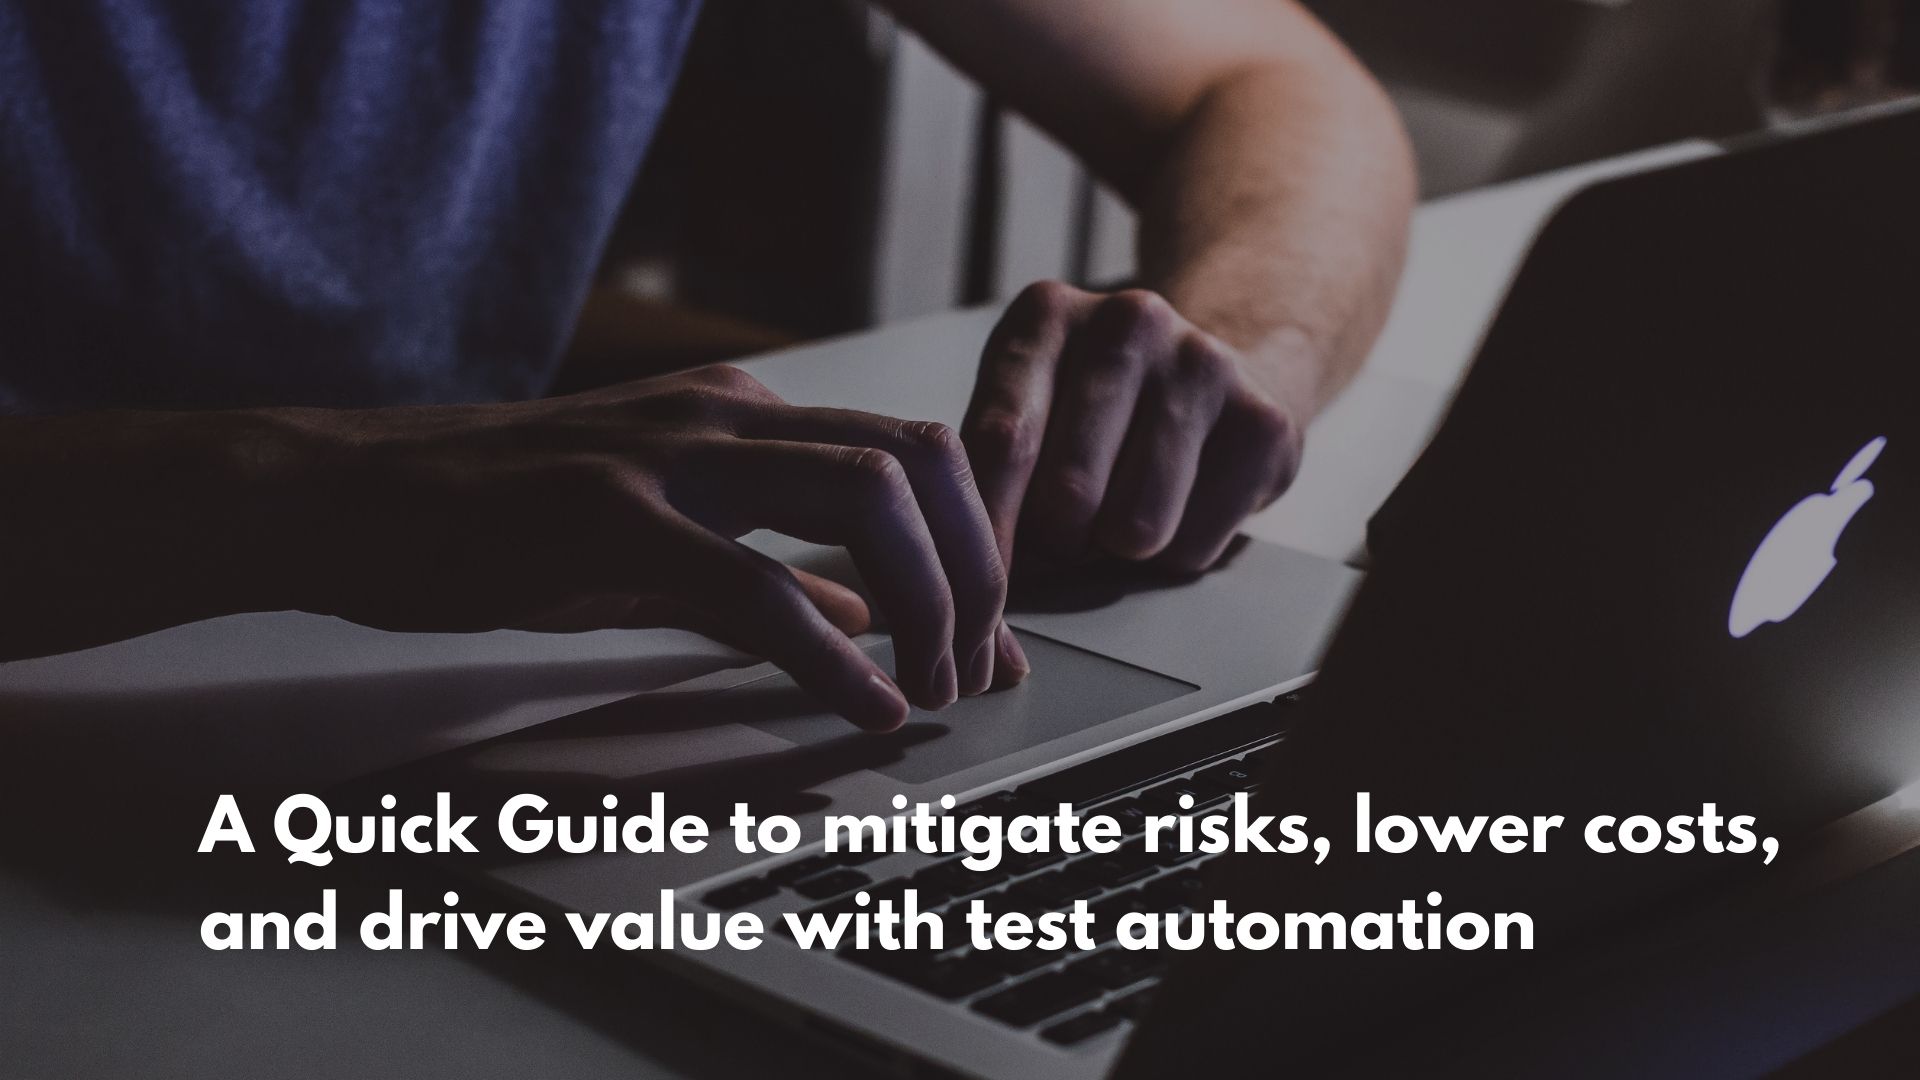 A Quick Guide to mitigate risks, lower costs, and drive value with test automation